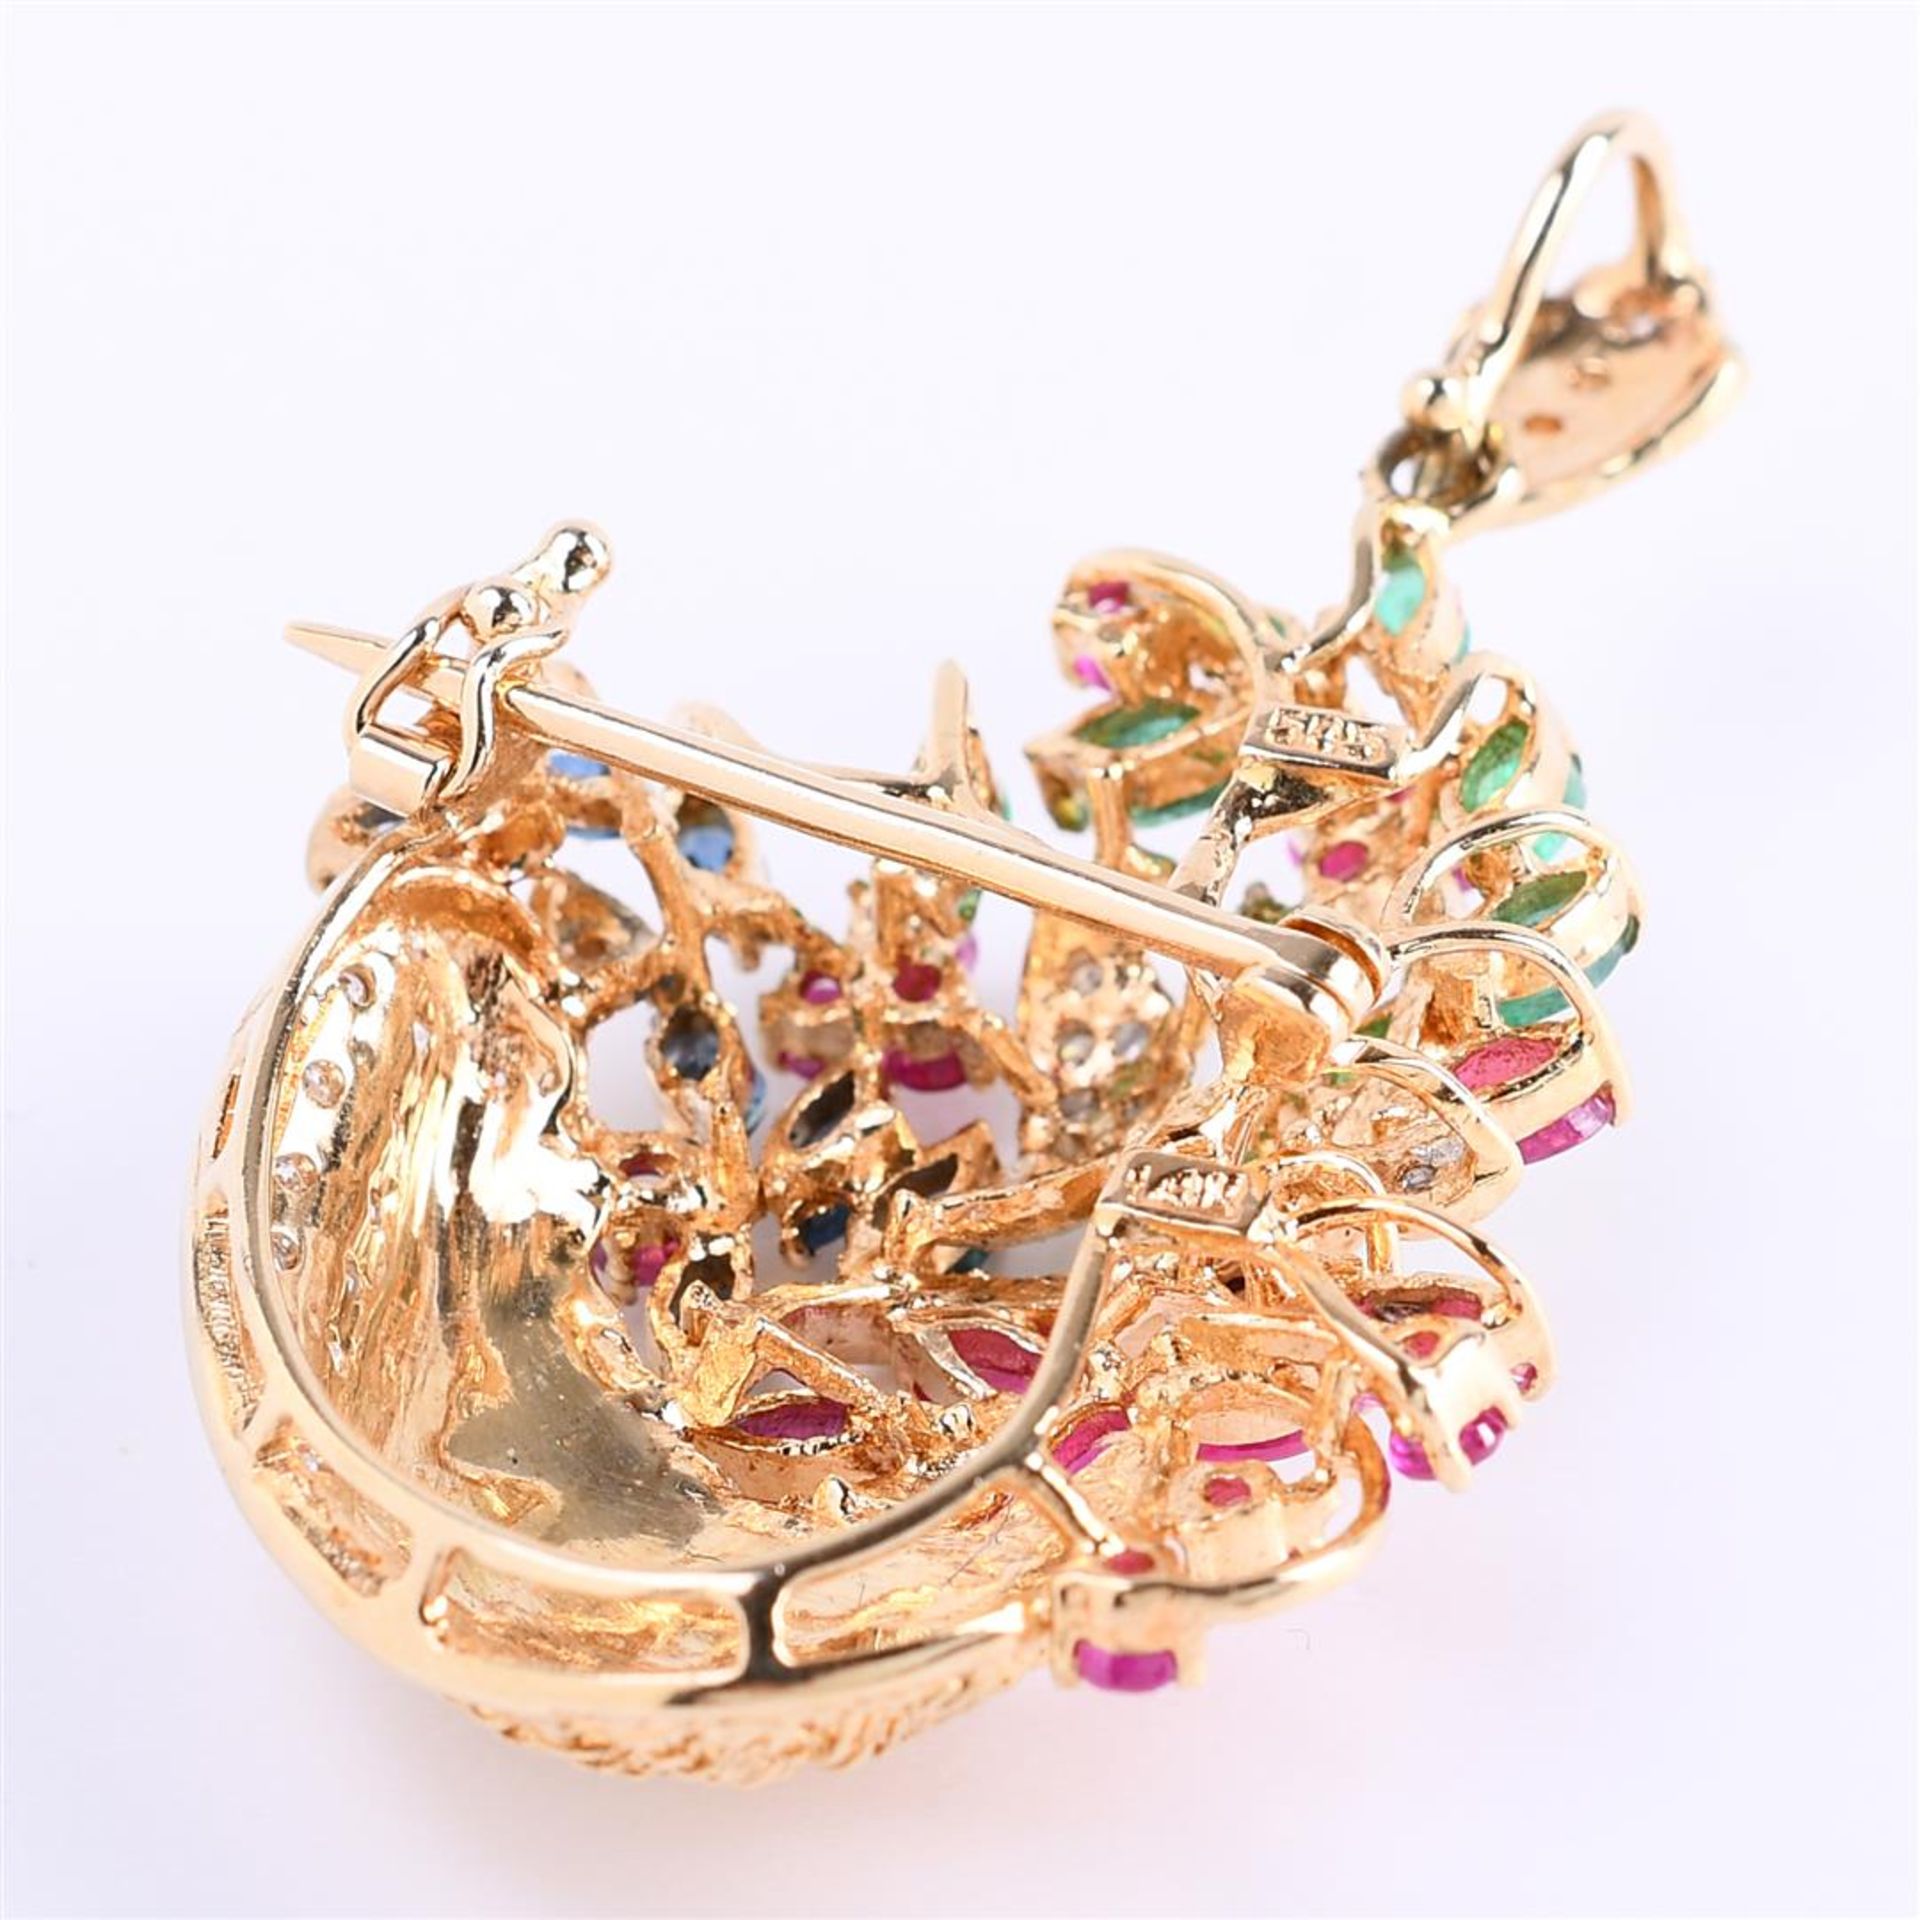 14 carat yellow gold ladies brooch and pendant combination of a flower basket (1960s-70s) - Image 4 of 6